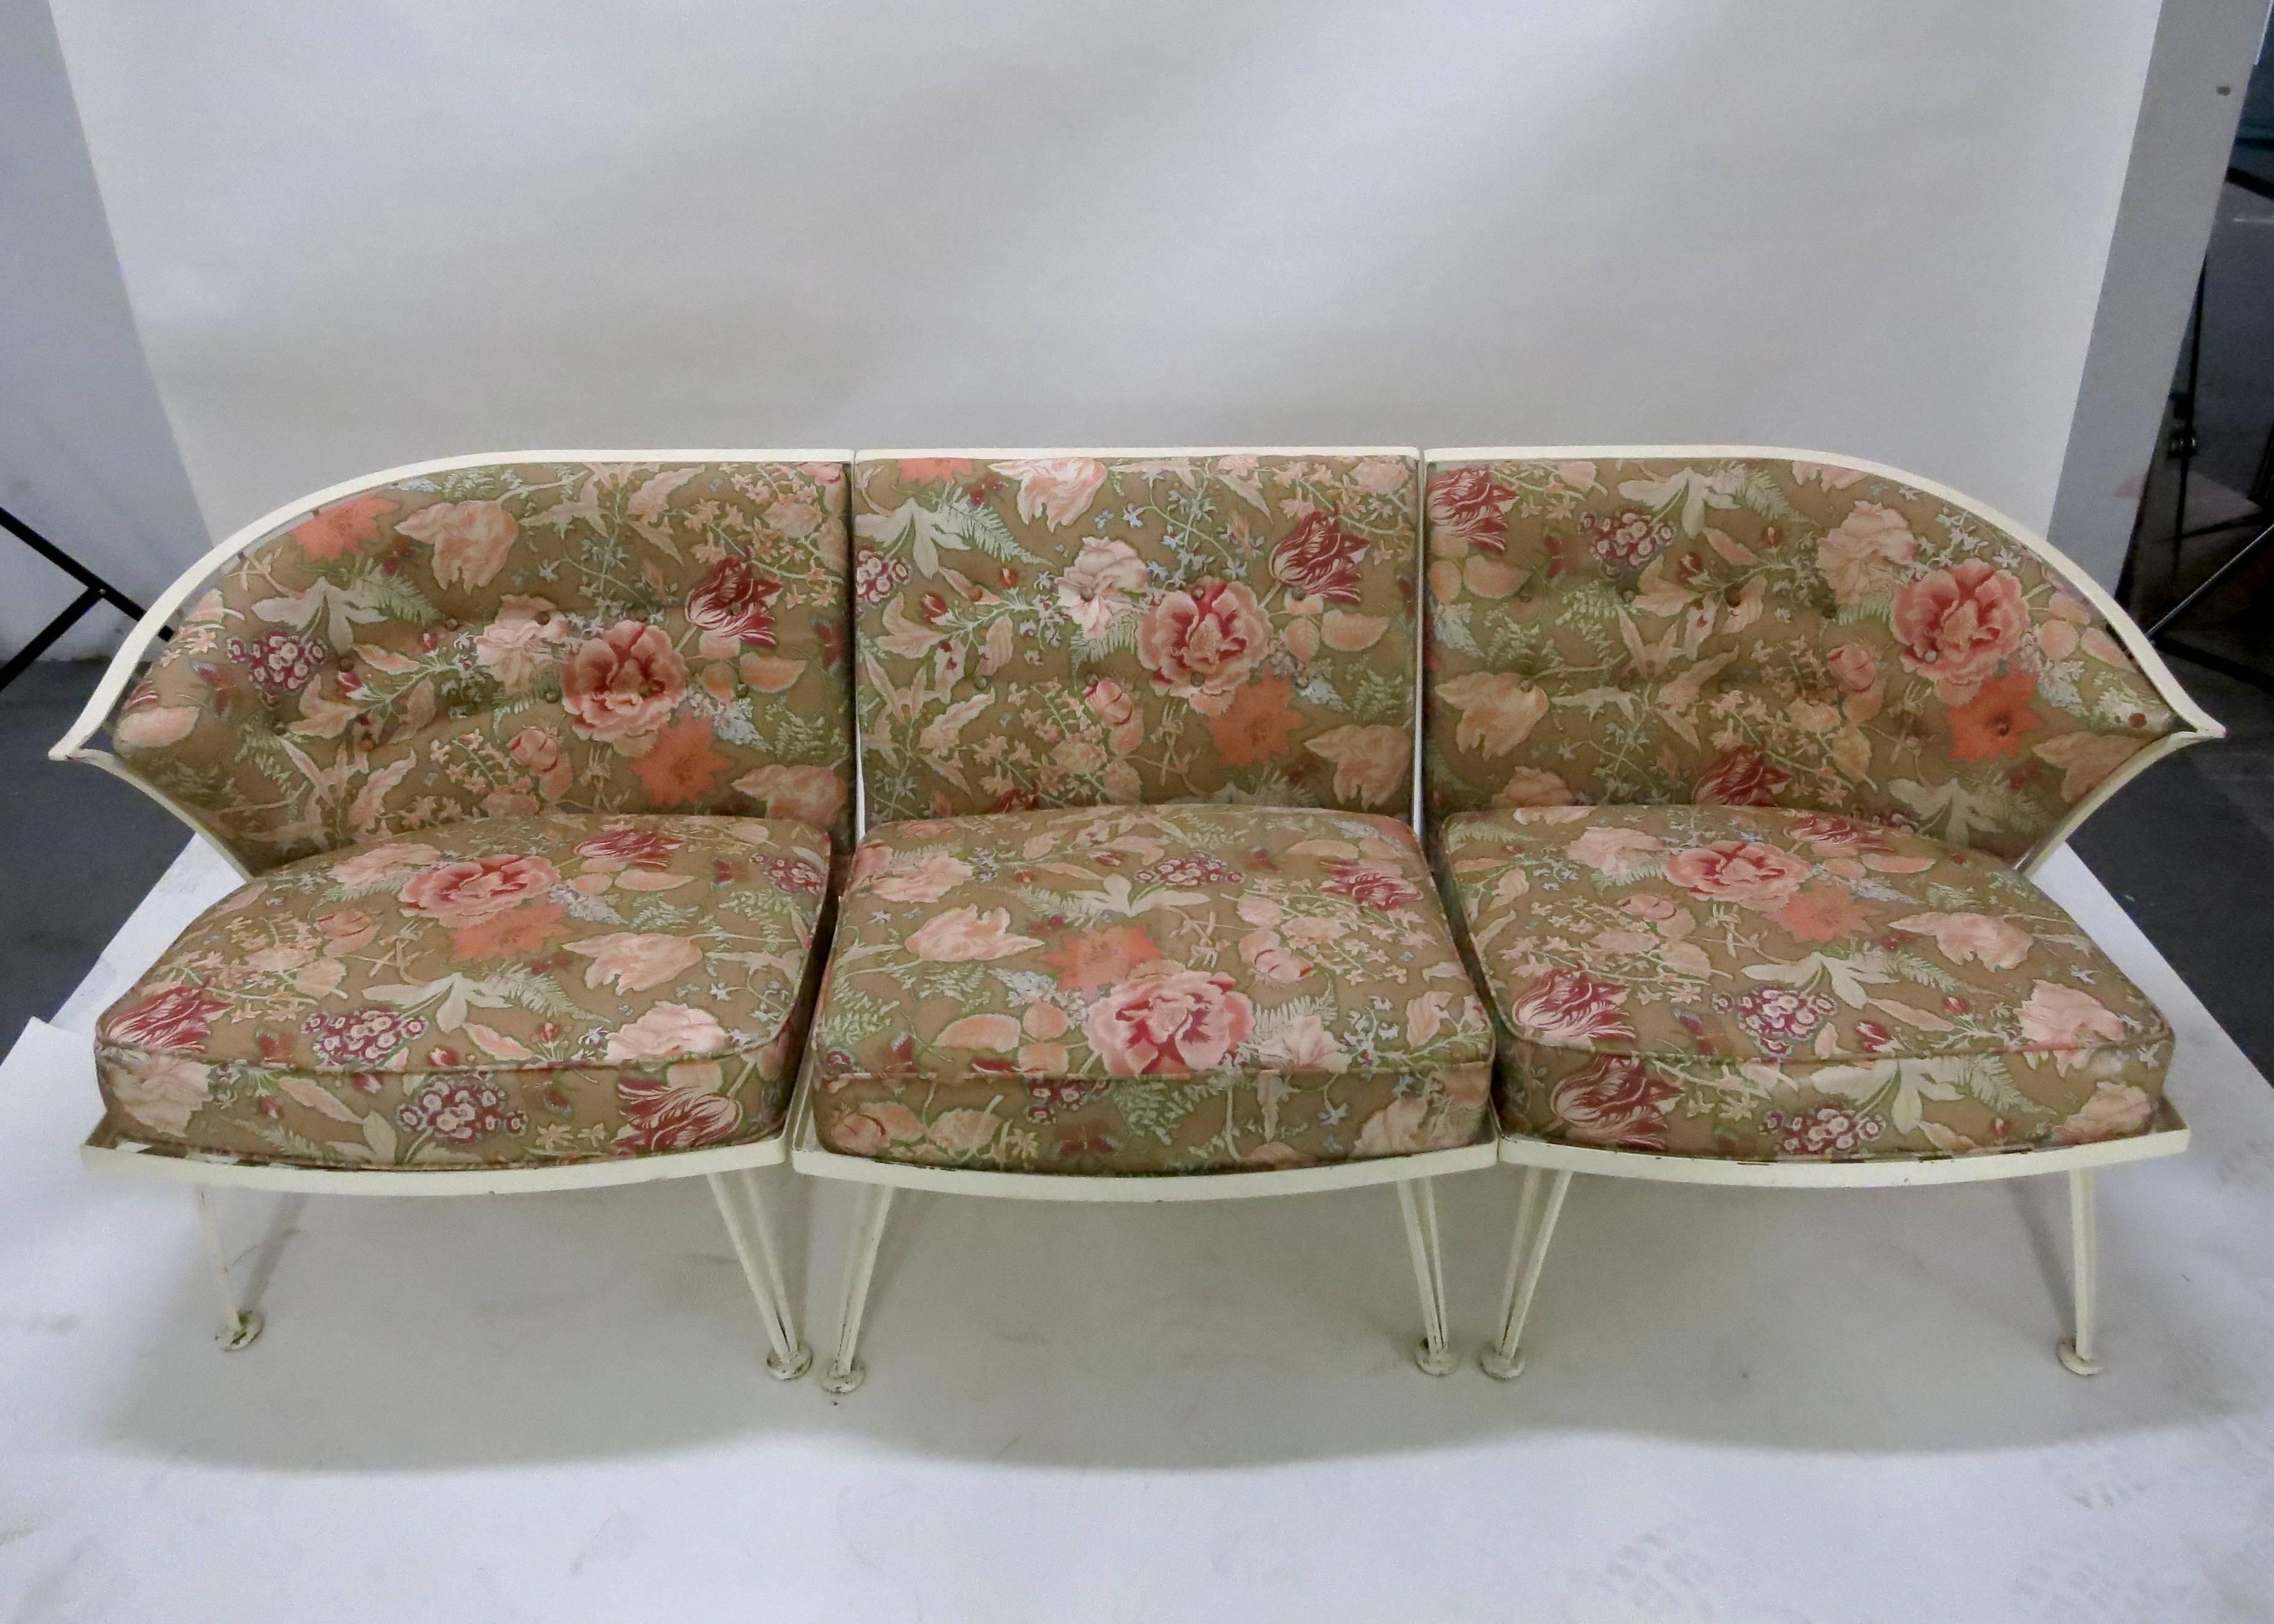 A three-piece Sectional garden sofa with a curved back original fabric and two chairs listed separately and another three-piece sectional available. Can be arranged as a four-seat with a loveseat and two side chairs.